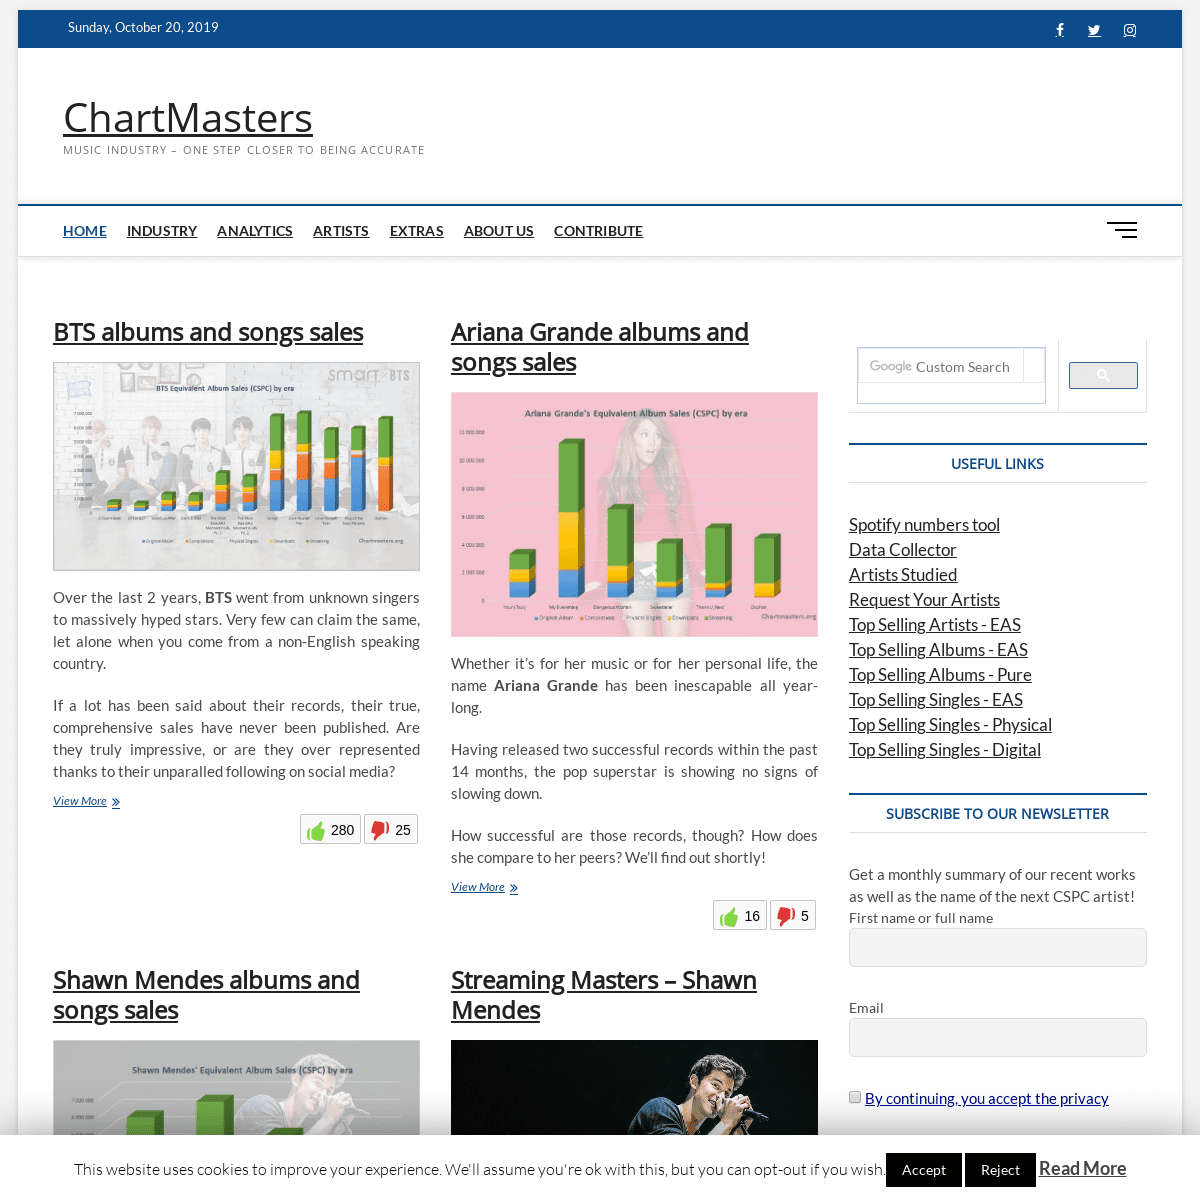 A complete backup of chartmasters.org